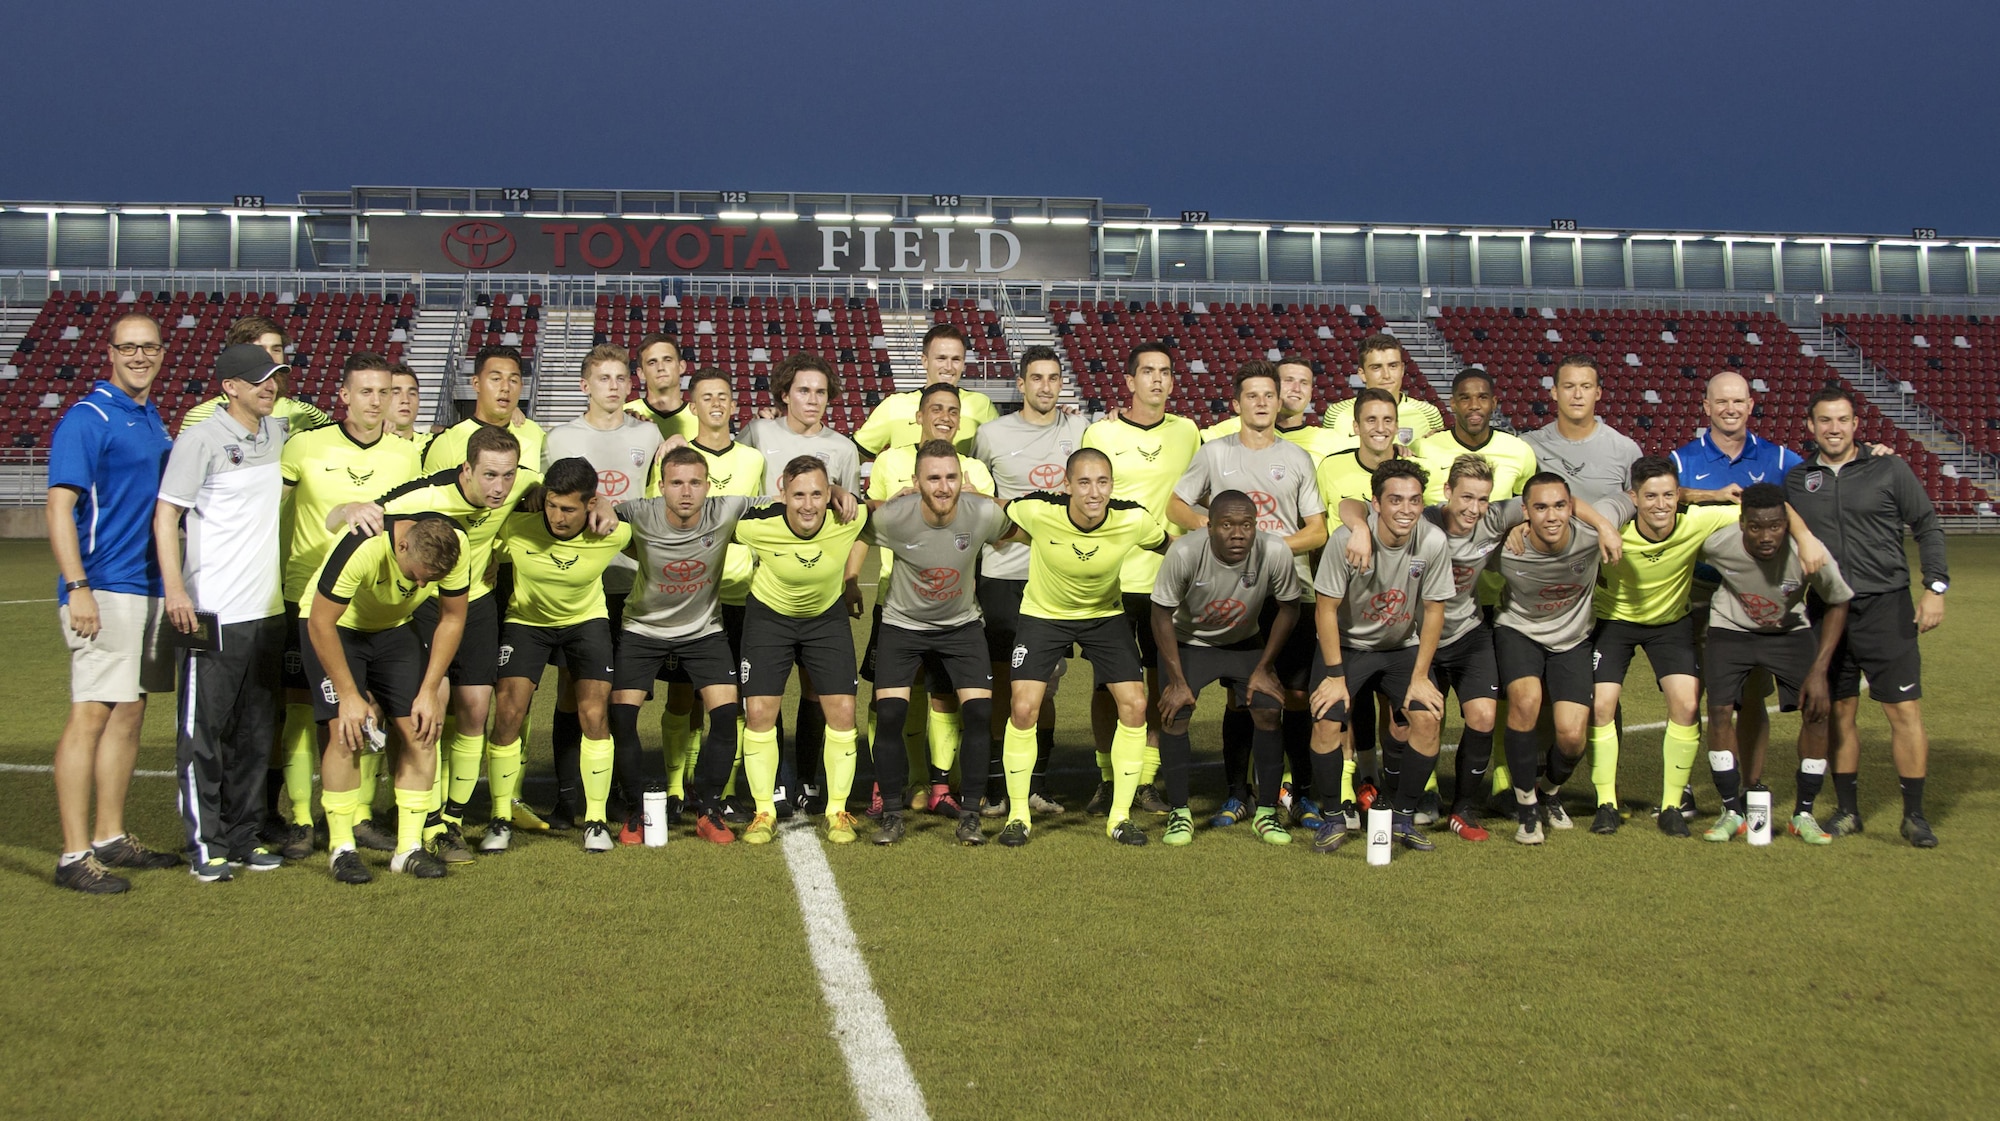 The All-Air Force men's soccer team and the San Antonio Football Club pose for a group photo after their exhibition match May 4 at Toyota Field in San Antonio. SAFC won, 3-0, and the Air Force team closed its training camp with a 12-4 record. The Air Force team is competing in the Armed Forces Championships through May 14 at Fort Benning, Georgia. (U.S. Air Force photo/Carole Chiles Fuller/Released)